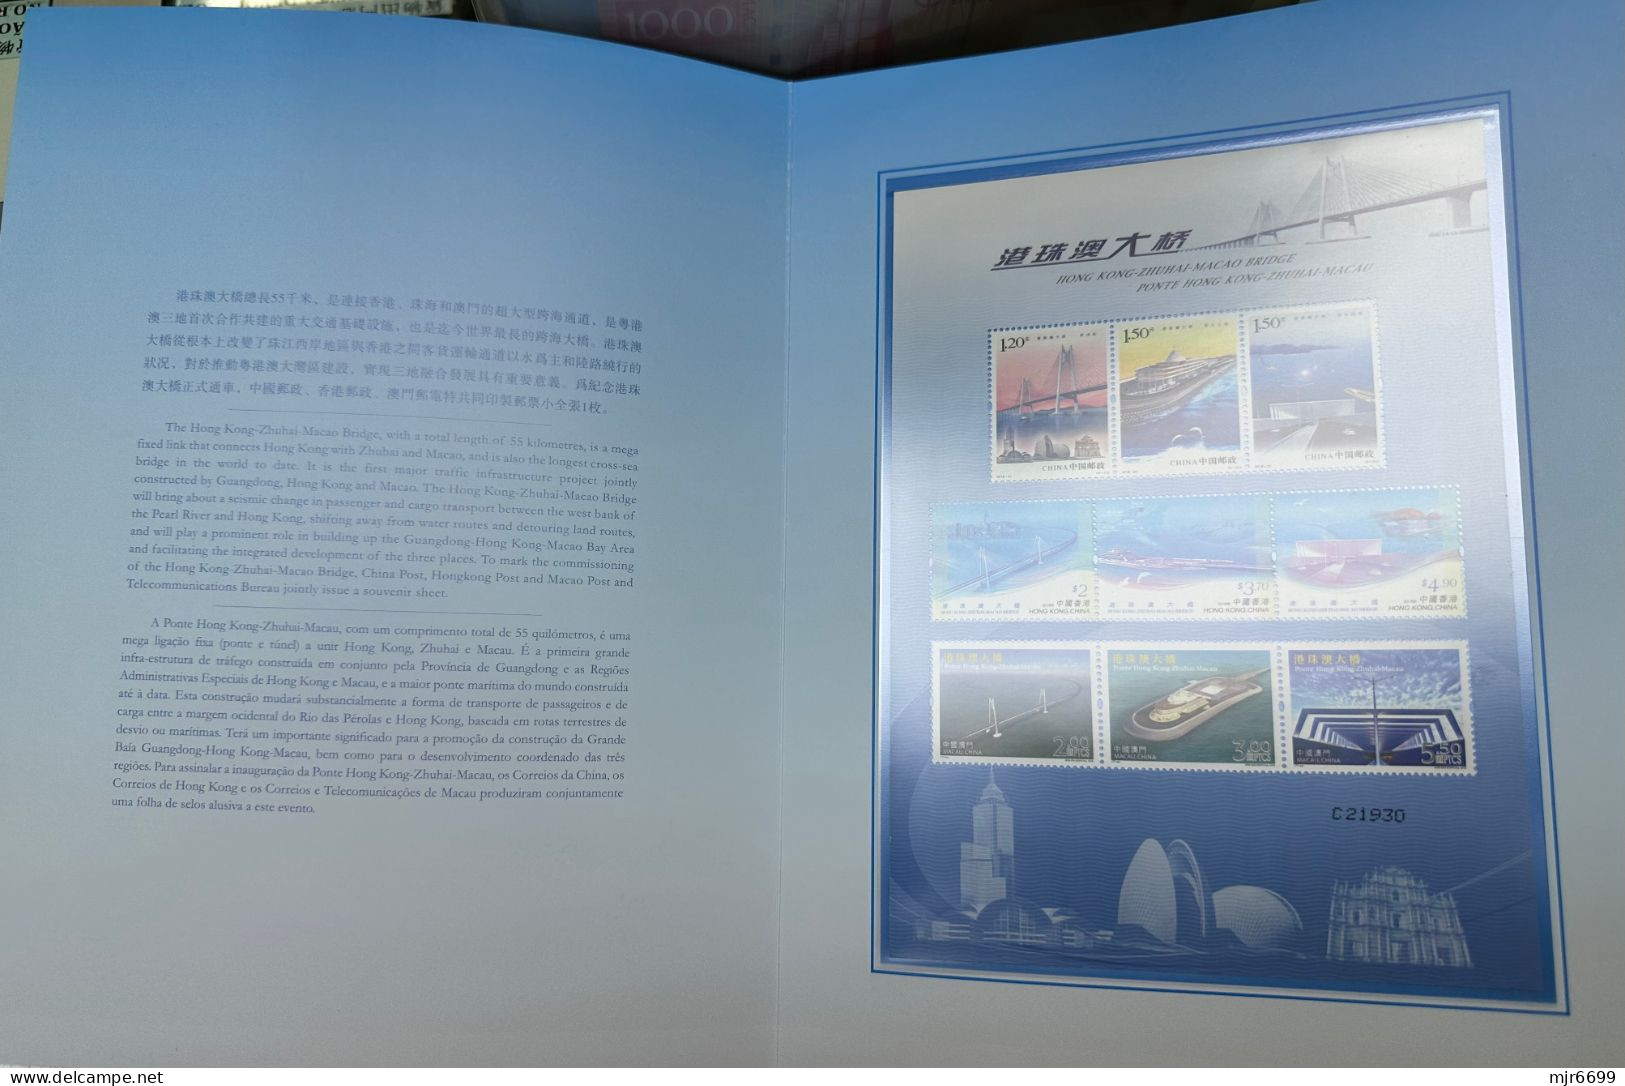 HONG KONG - ZHUHAI - MACAO BRIDGE, SPECIAL ISSUE OF A SHEETLET. SOLD OUT AT FIRST DAY. - Collections, Lots & Series